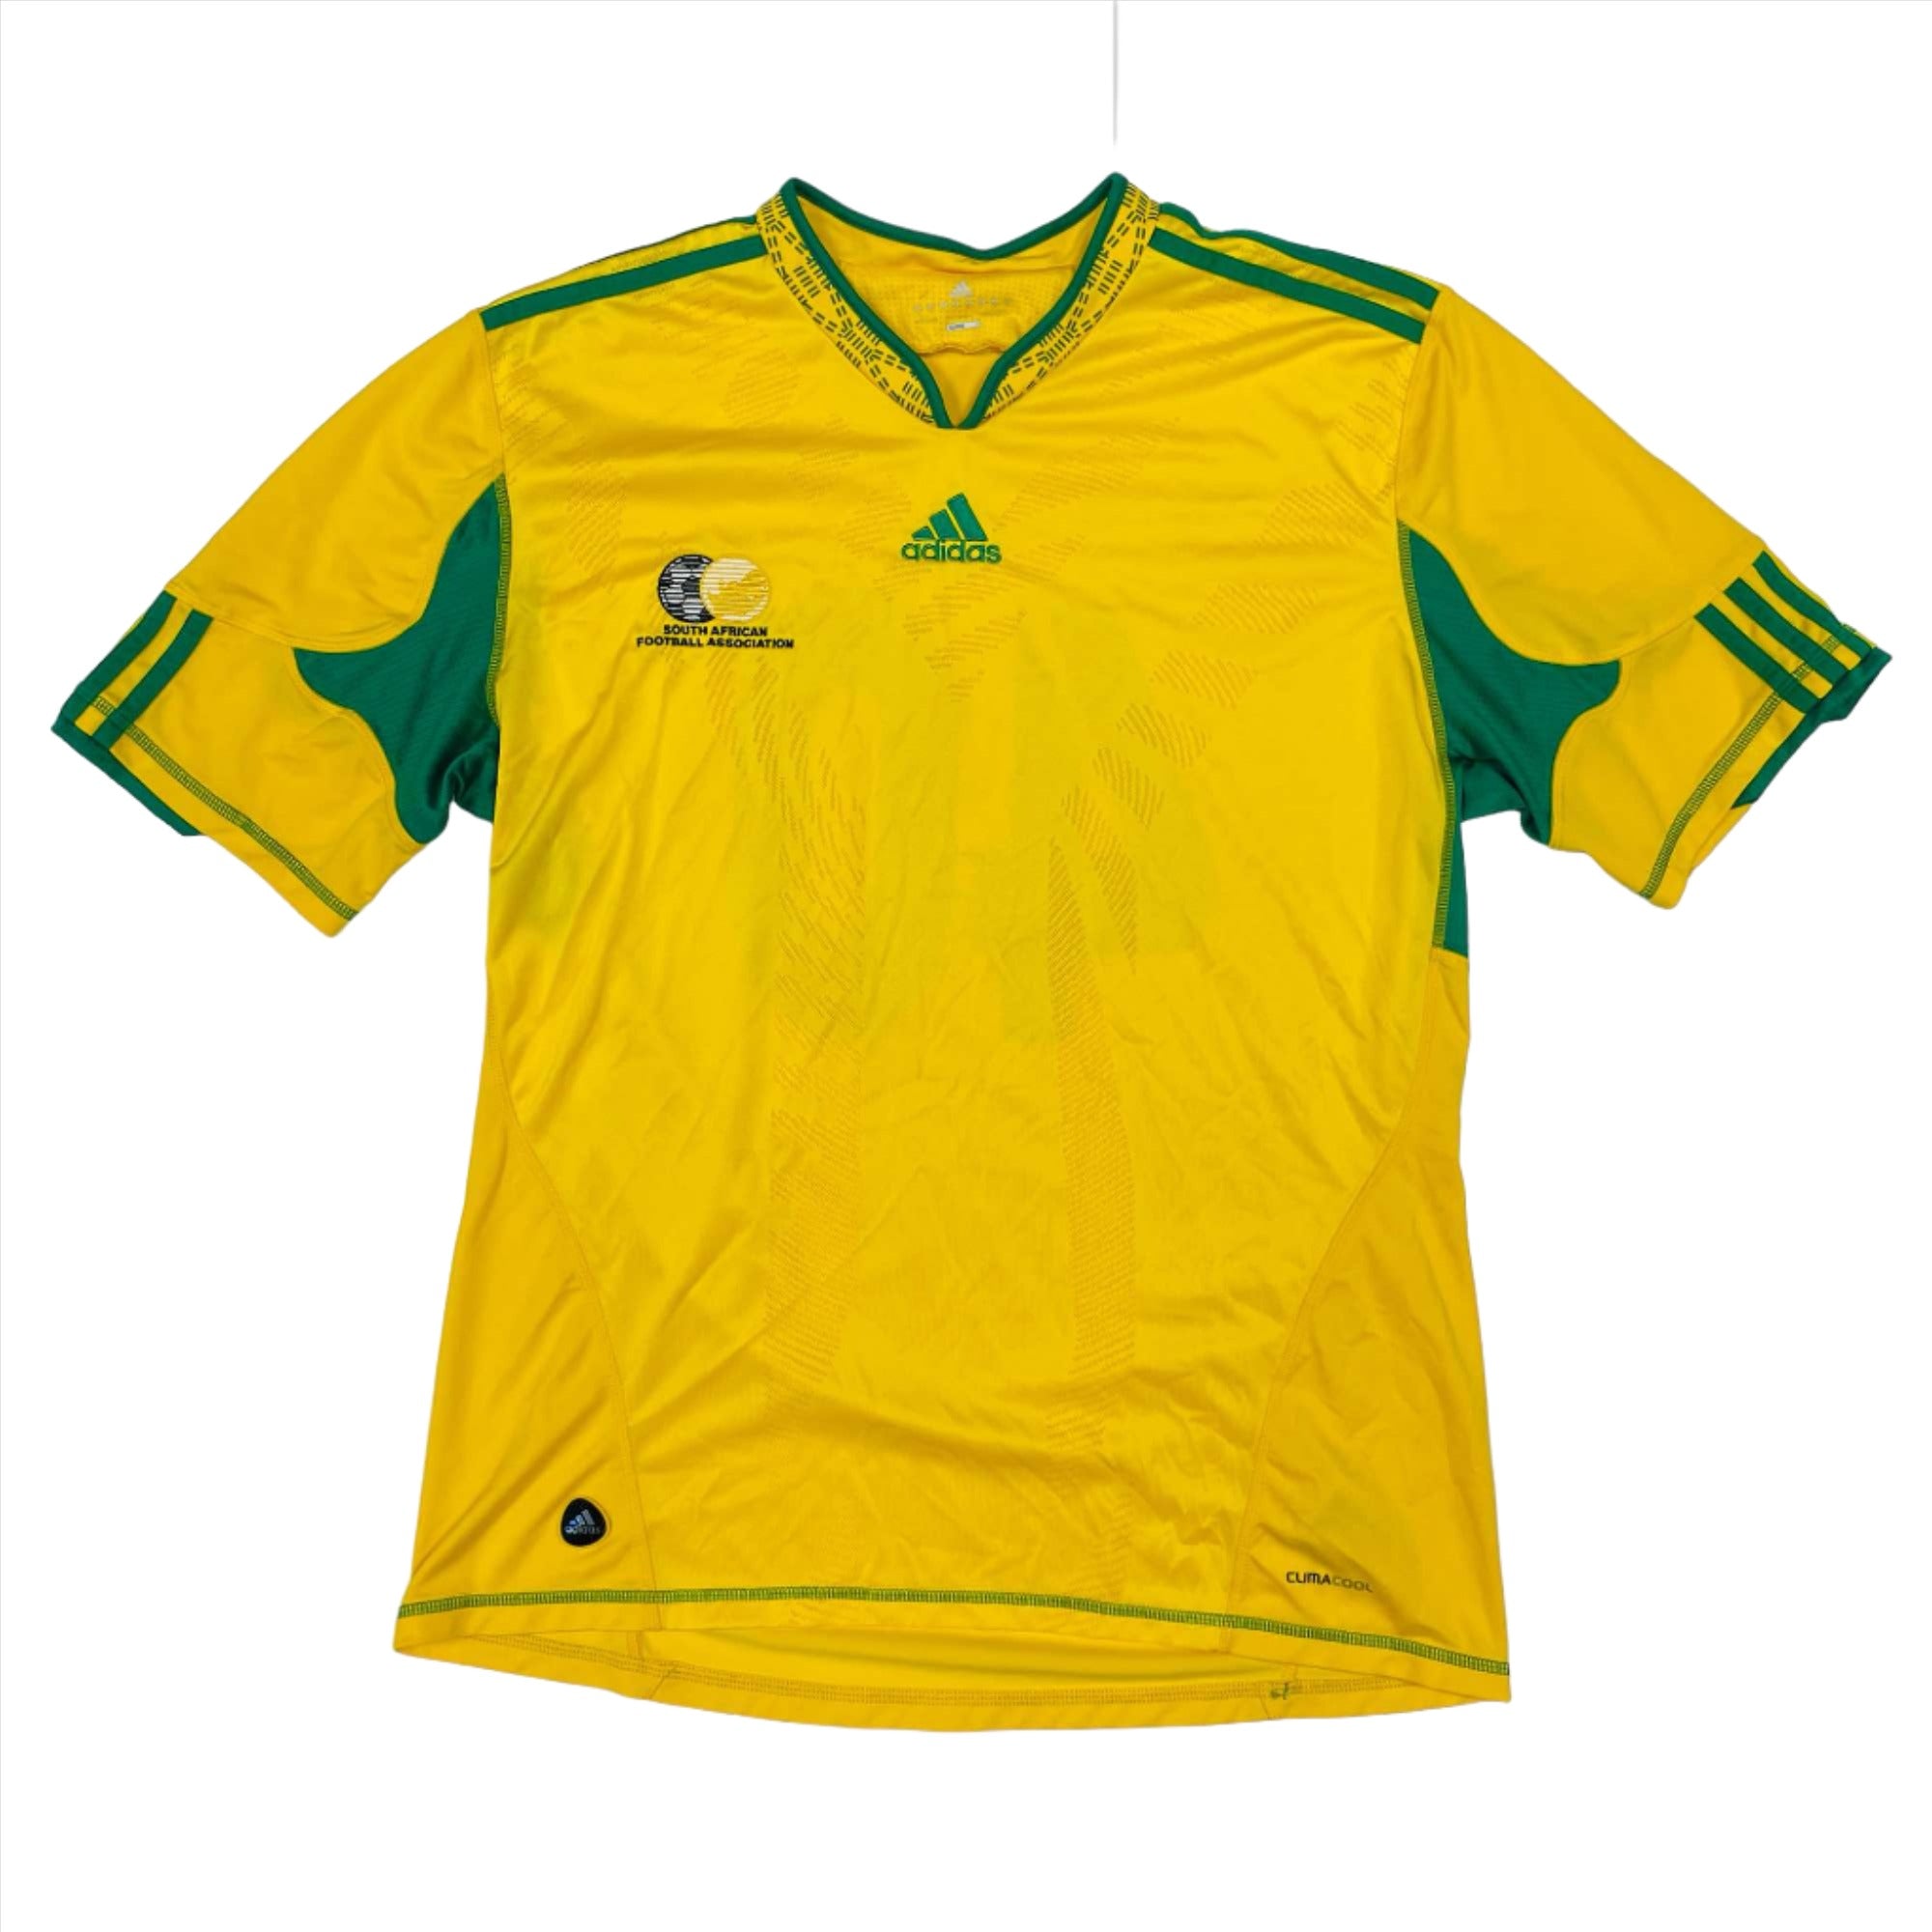 2010 South Africa World Cup Adidas Shirt - Large